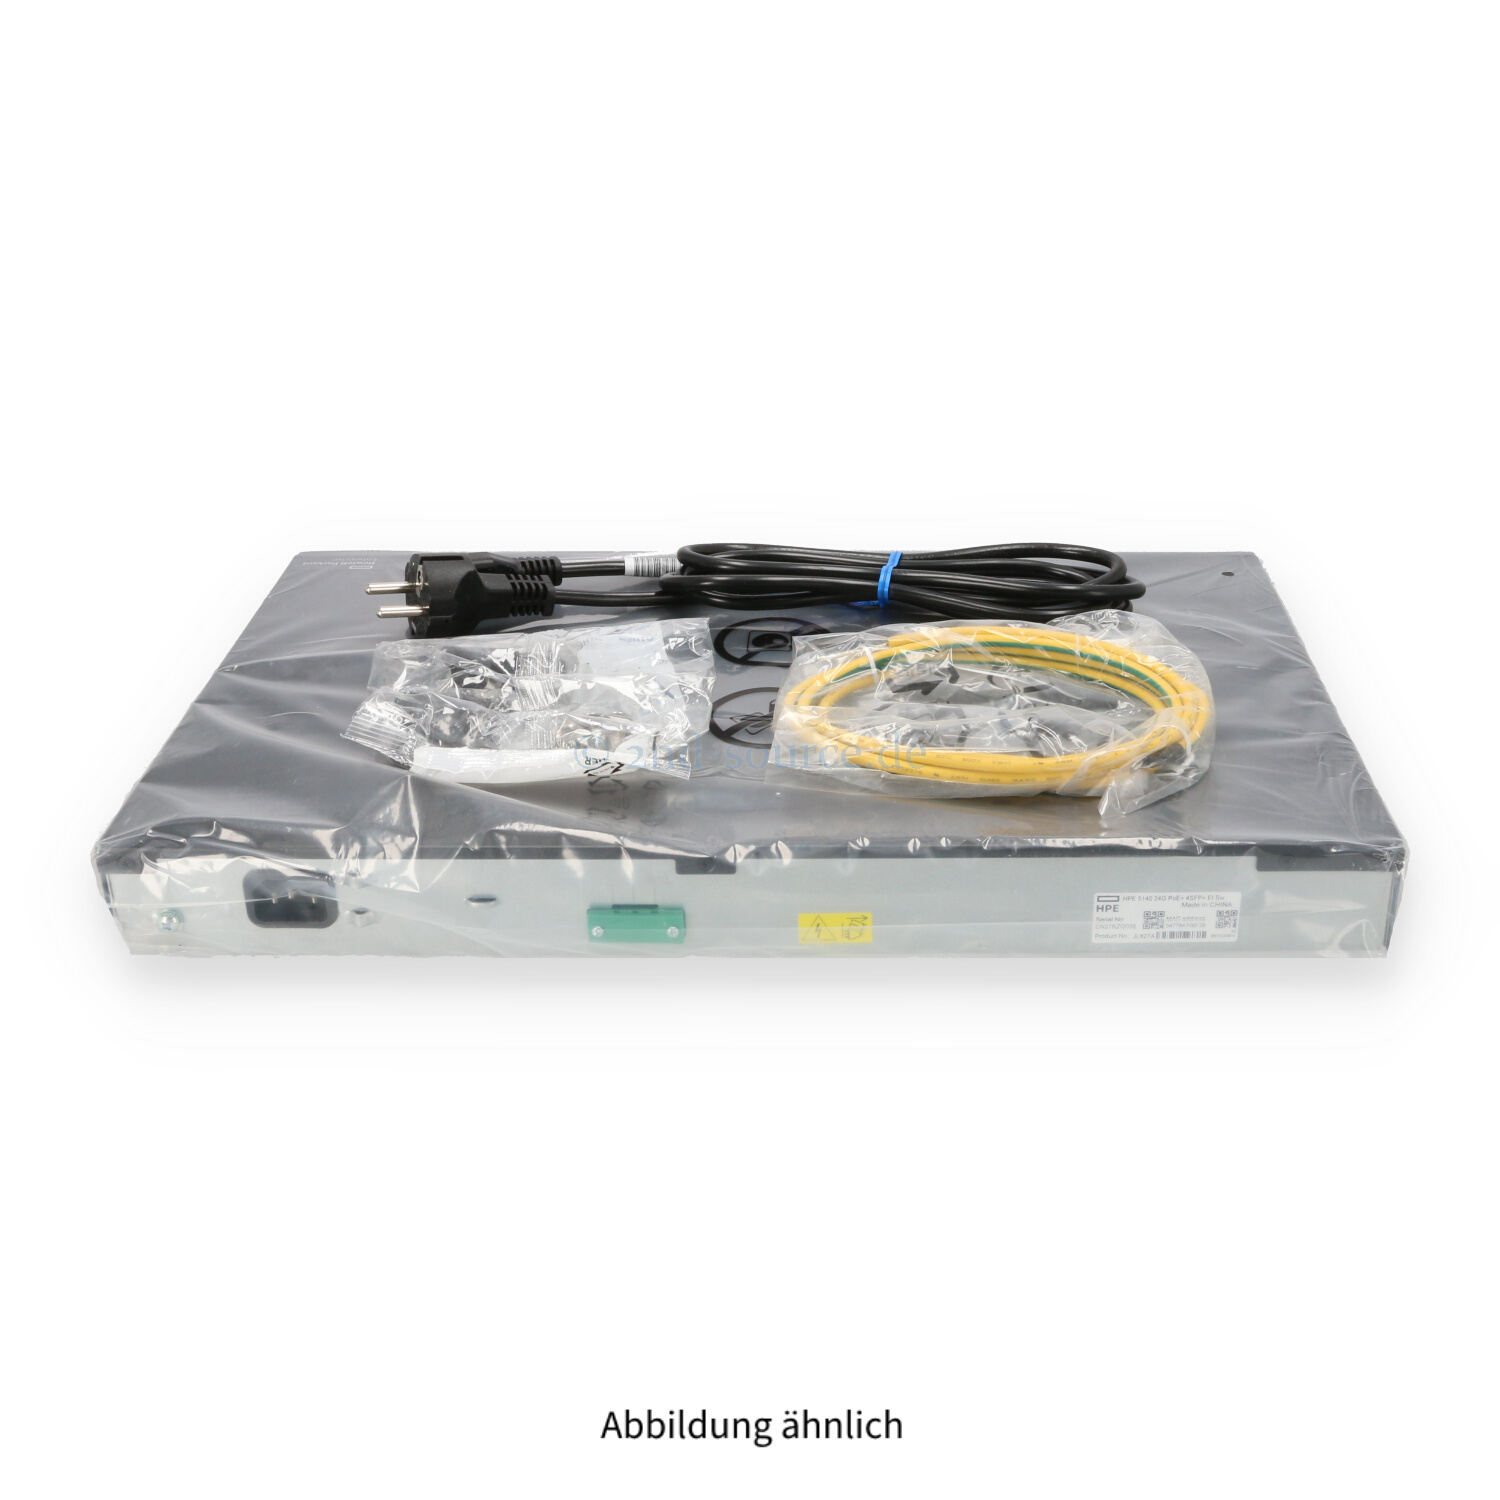 HPE FlexNetwork 5140-24G-SFP+ 24x 1GbE PoE+ 4x Dual-Personality 1GbE 4x SFP+ 10GbE Managed Switch JL827A JL827-61001